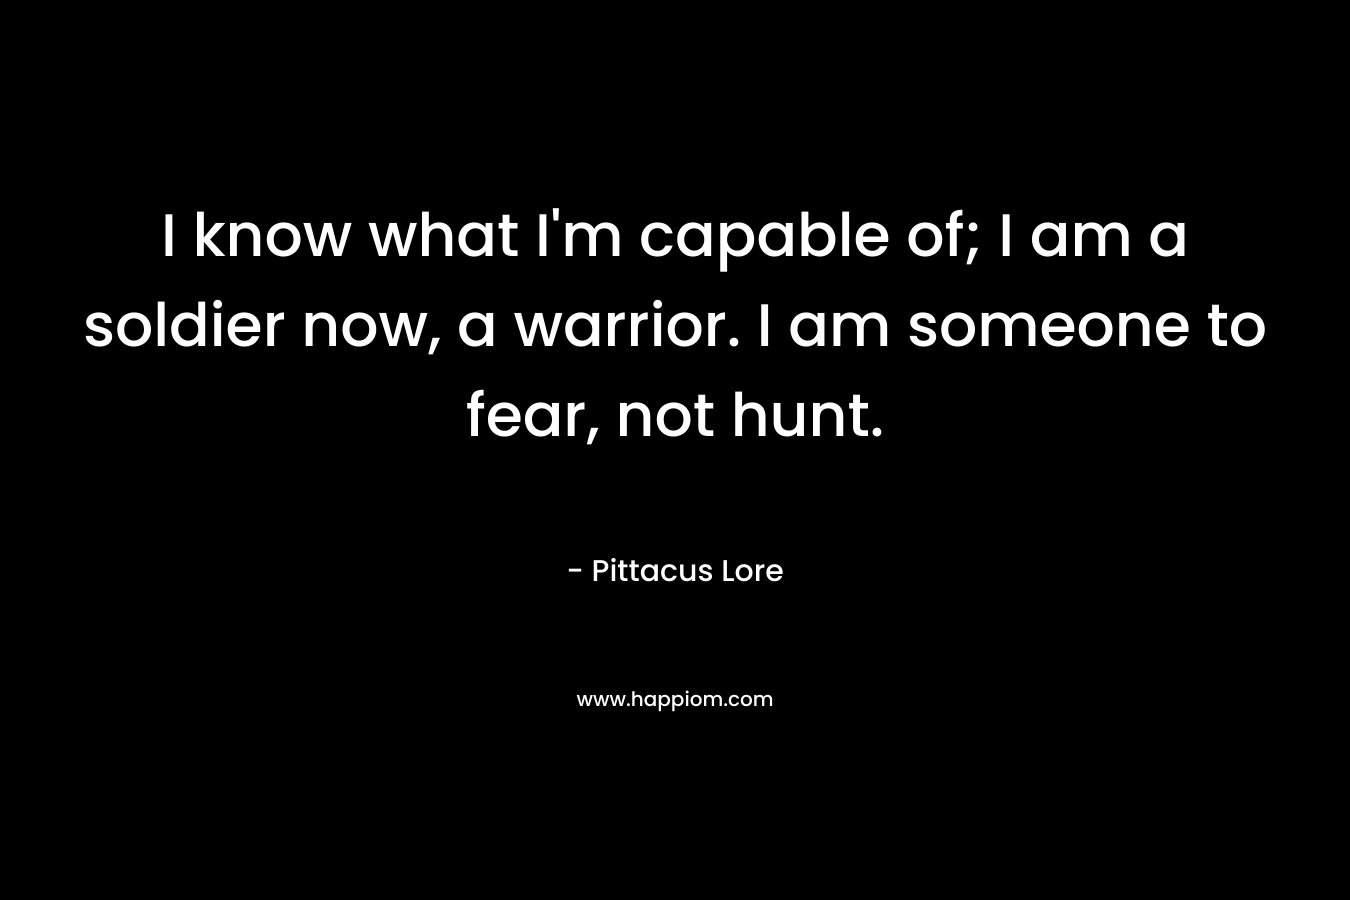 I know what I'm capable of; I am a soldier now, a warrior. I am someone to fear, not hunt.